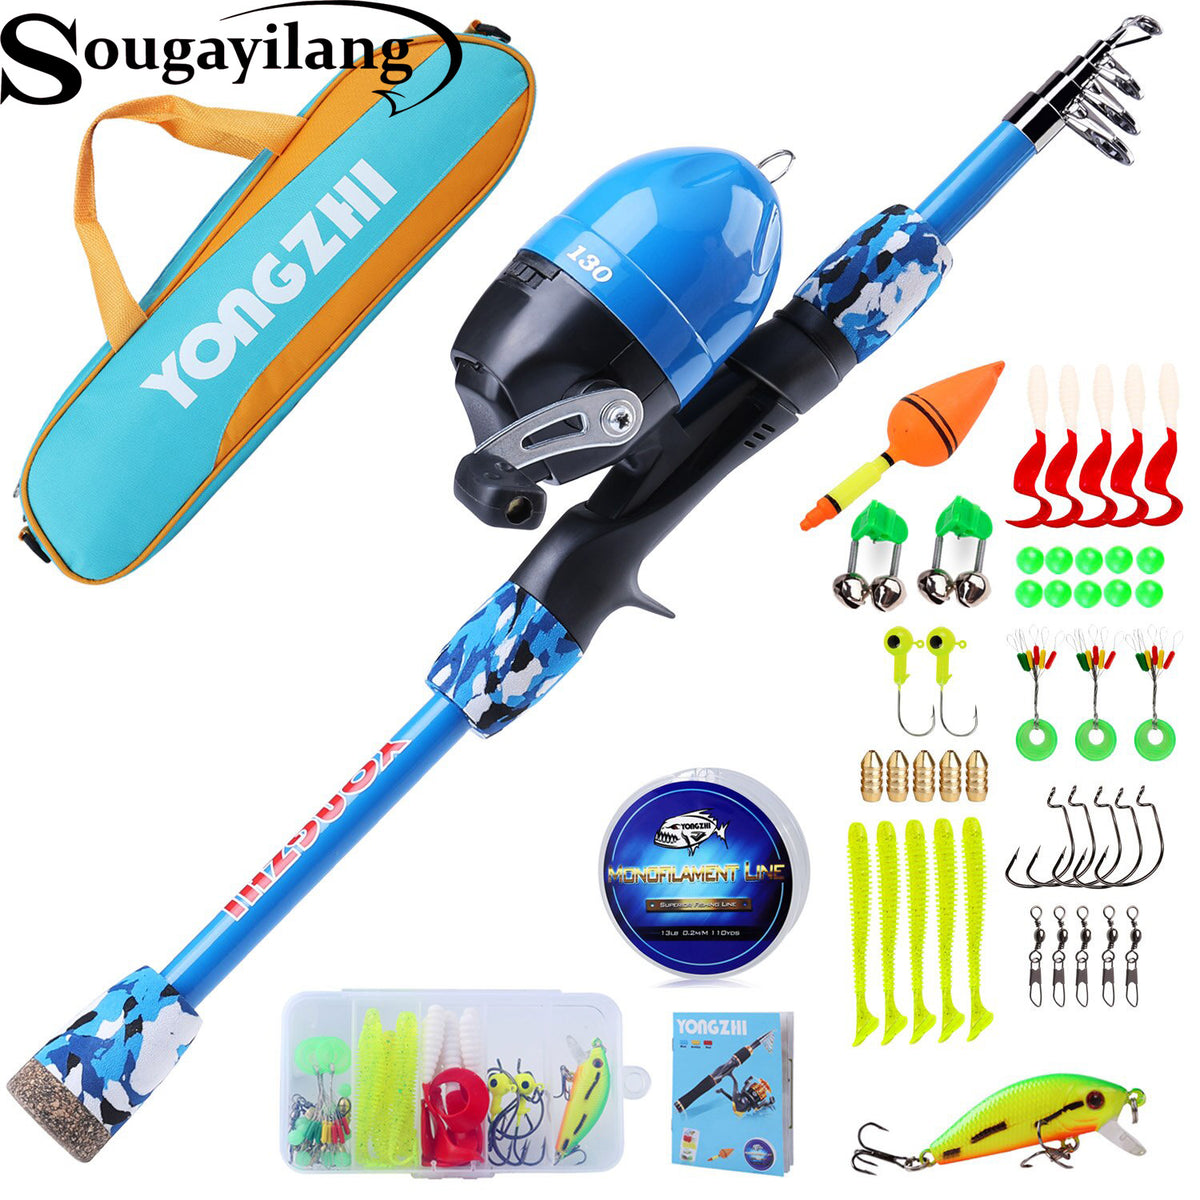 ODDSPRO Kids Fishing Pole Portable Telescopic Fishing Rod and Reel